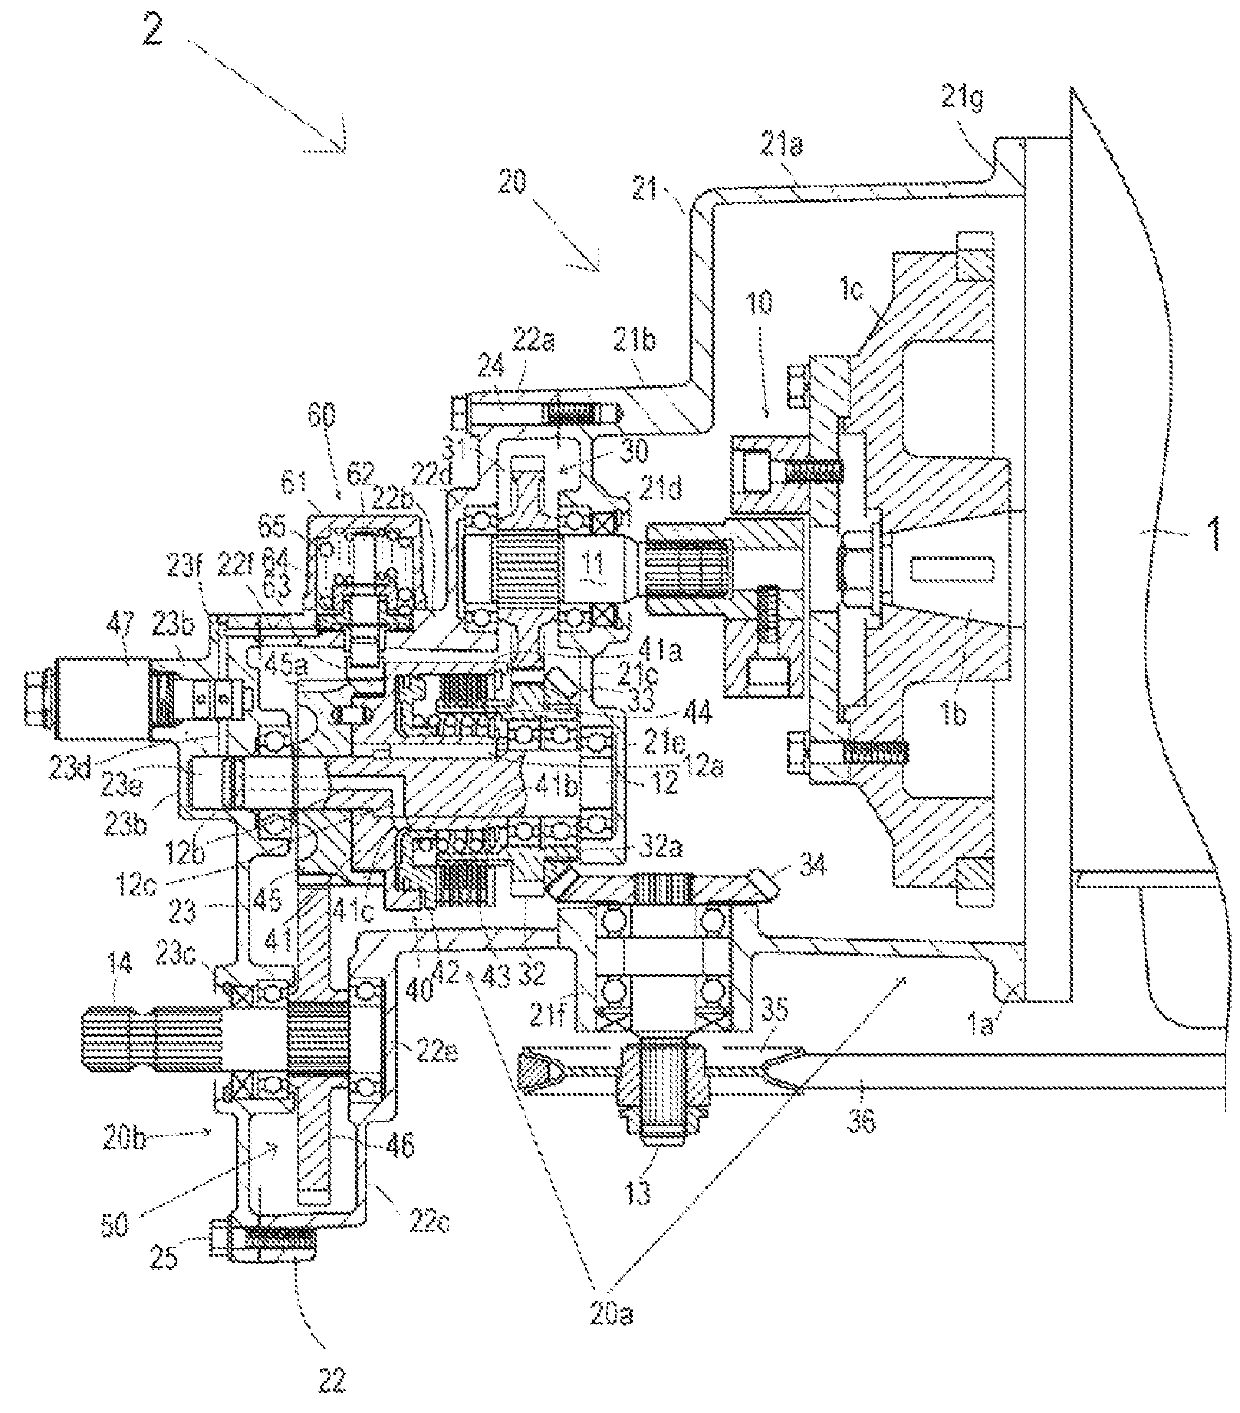 Transmission for working vehicle